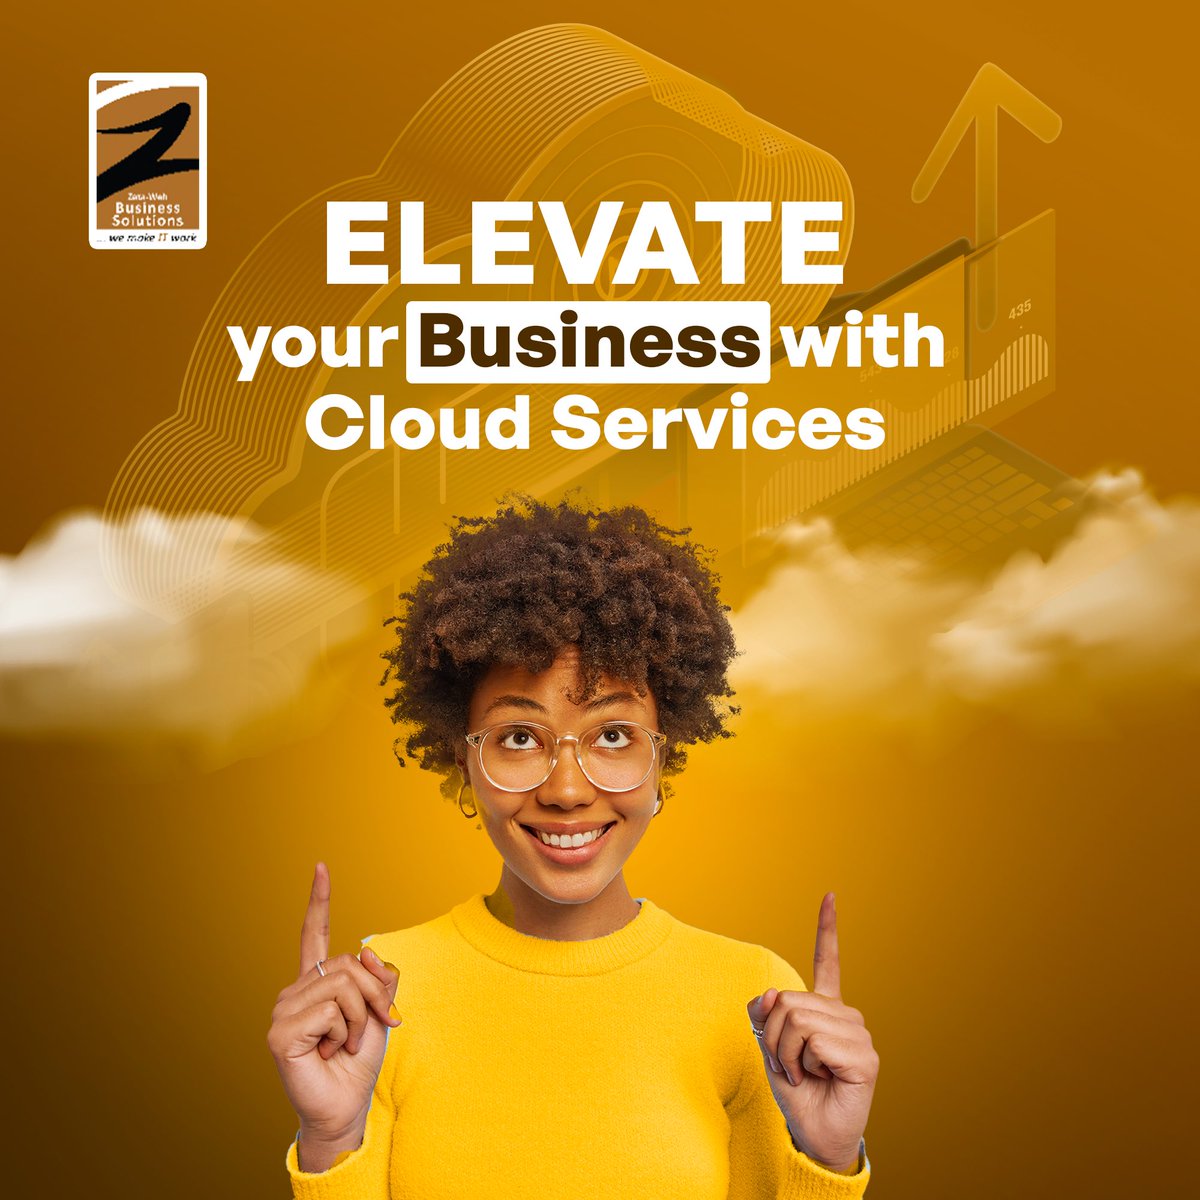 Unlock Flexibility, scalability and innovation to soar above the competition!☁️🧑‍💻

Call 02-02701444 or send an email to info@zeta-web.com.

#cloudservices #Managedservices #IT #enterprisesolution #ITmanagedservices #business #databackup #databackupsecurity #securednetwork